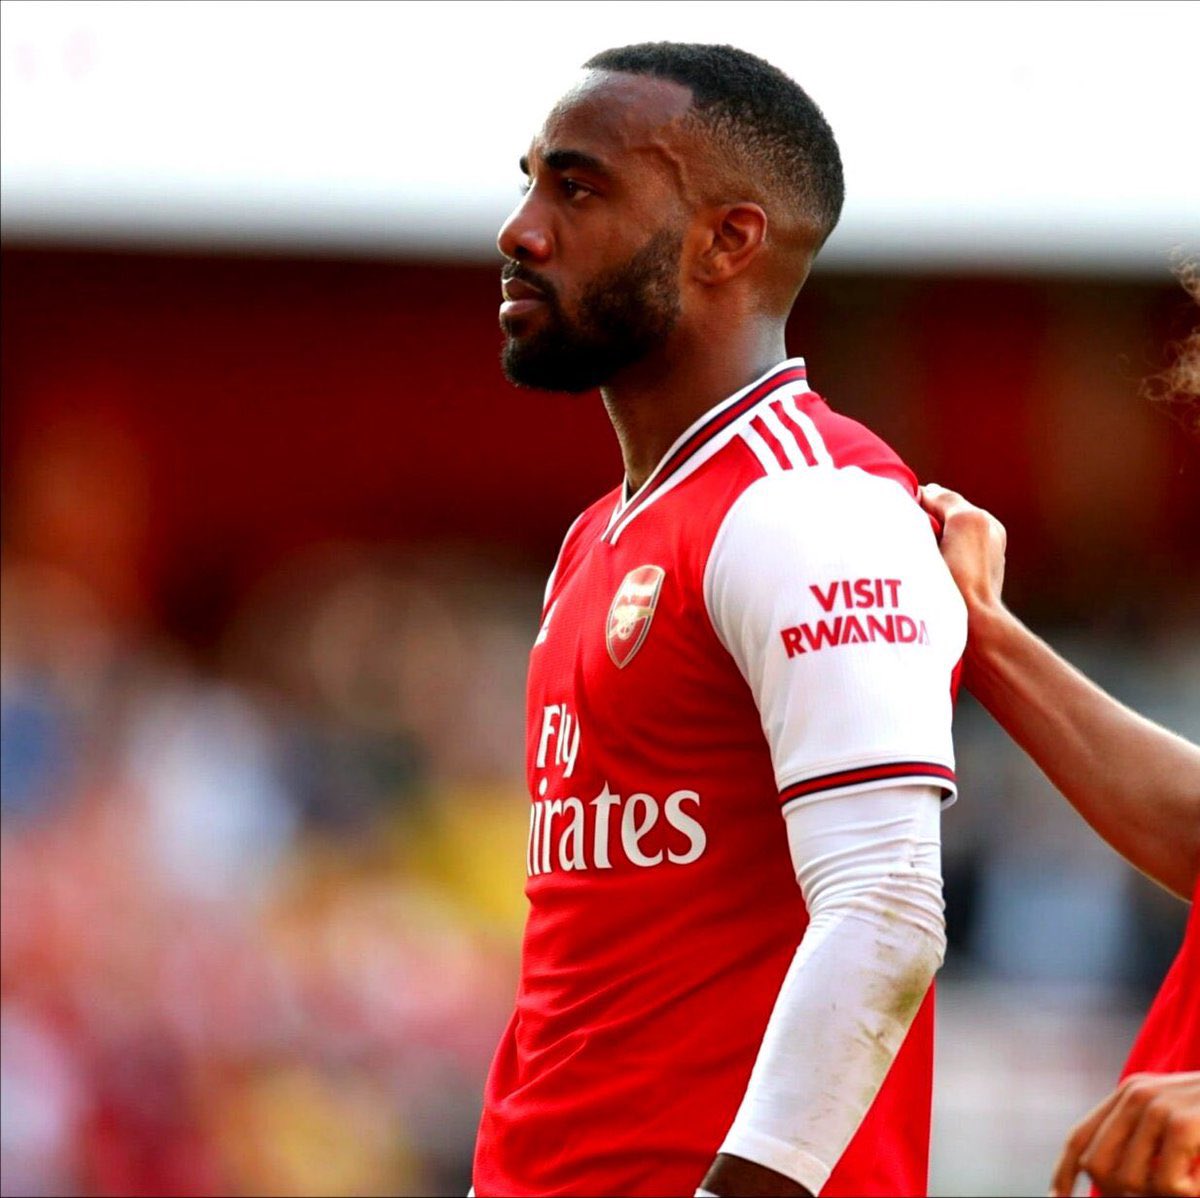 I am so happy for Laca recently. It’s like he is finally finding his form in the CF position. I am so hopeful for the rest of the season and I think we should offer him and extension.